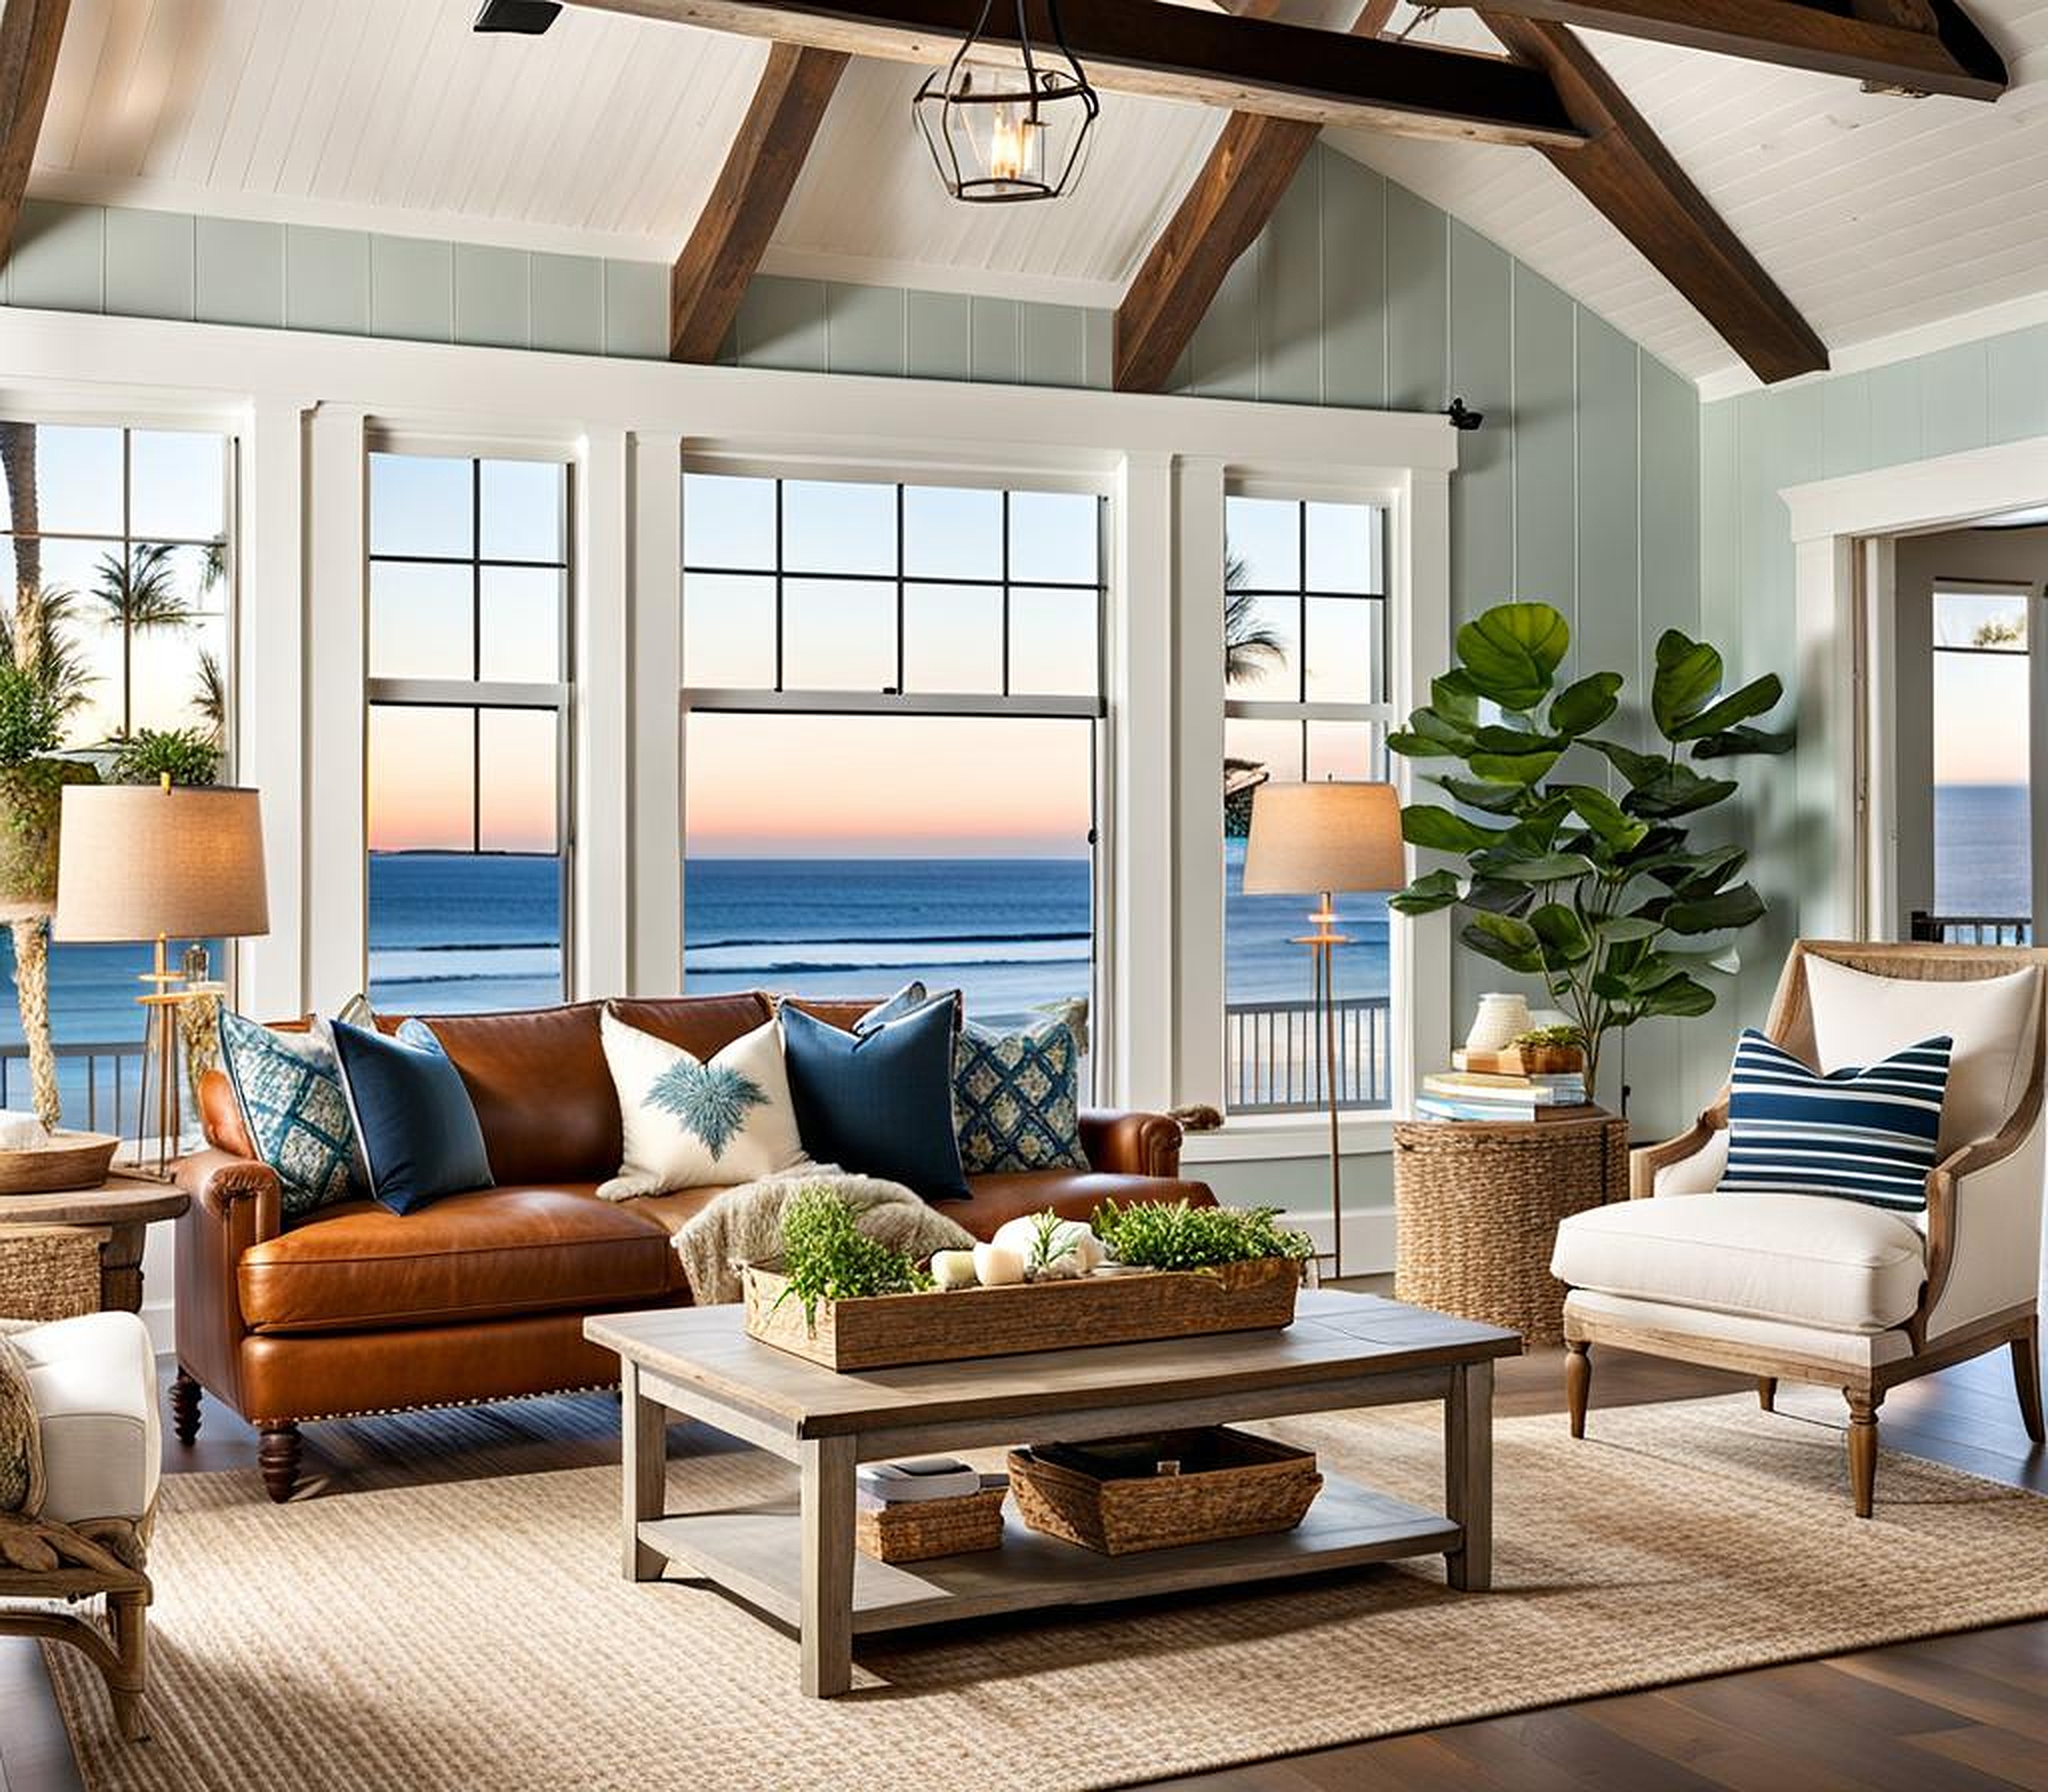 Breathtaking Coastal Farmhouse Living Rooms with Rustic Touches